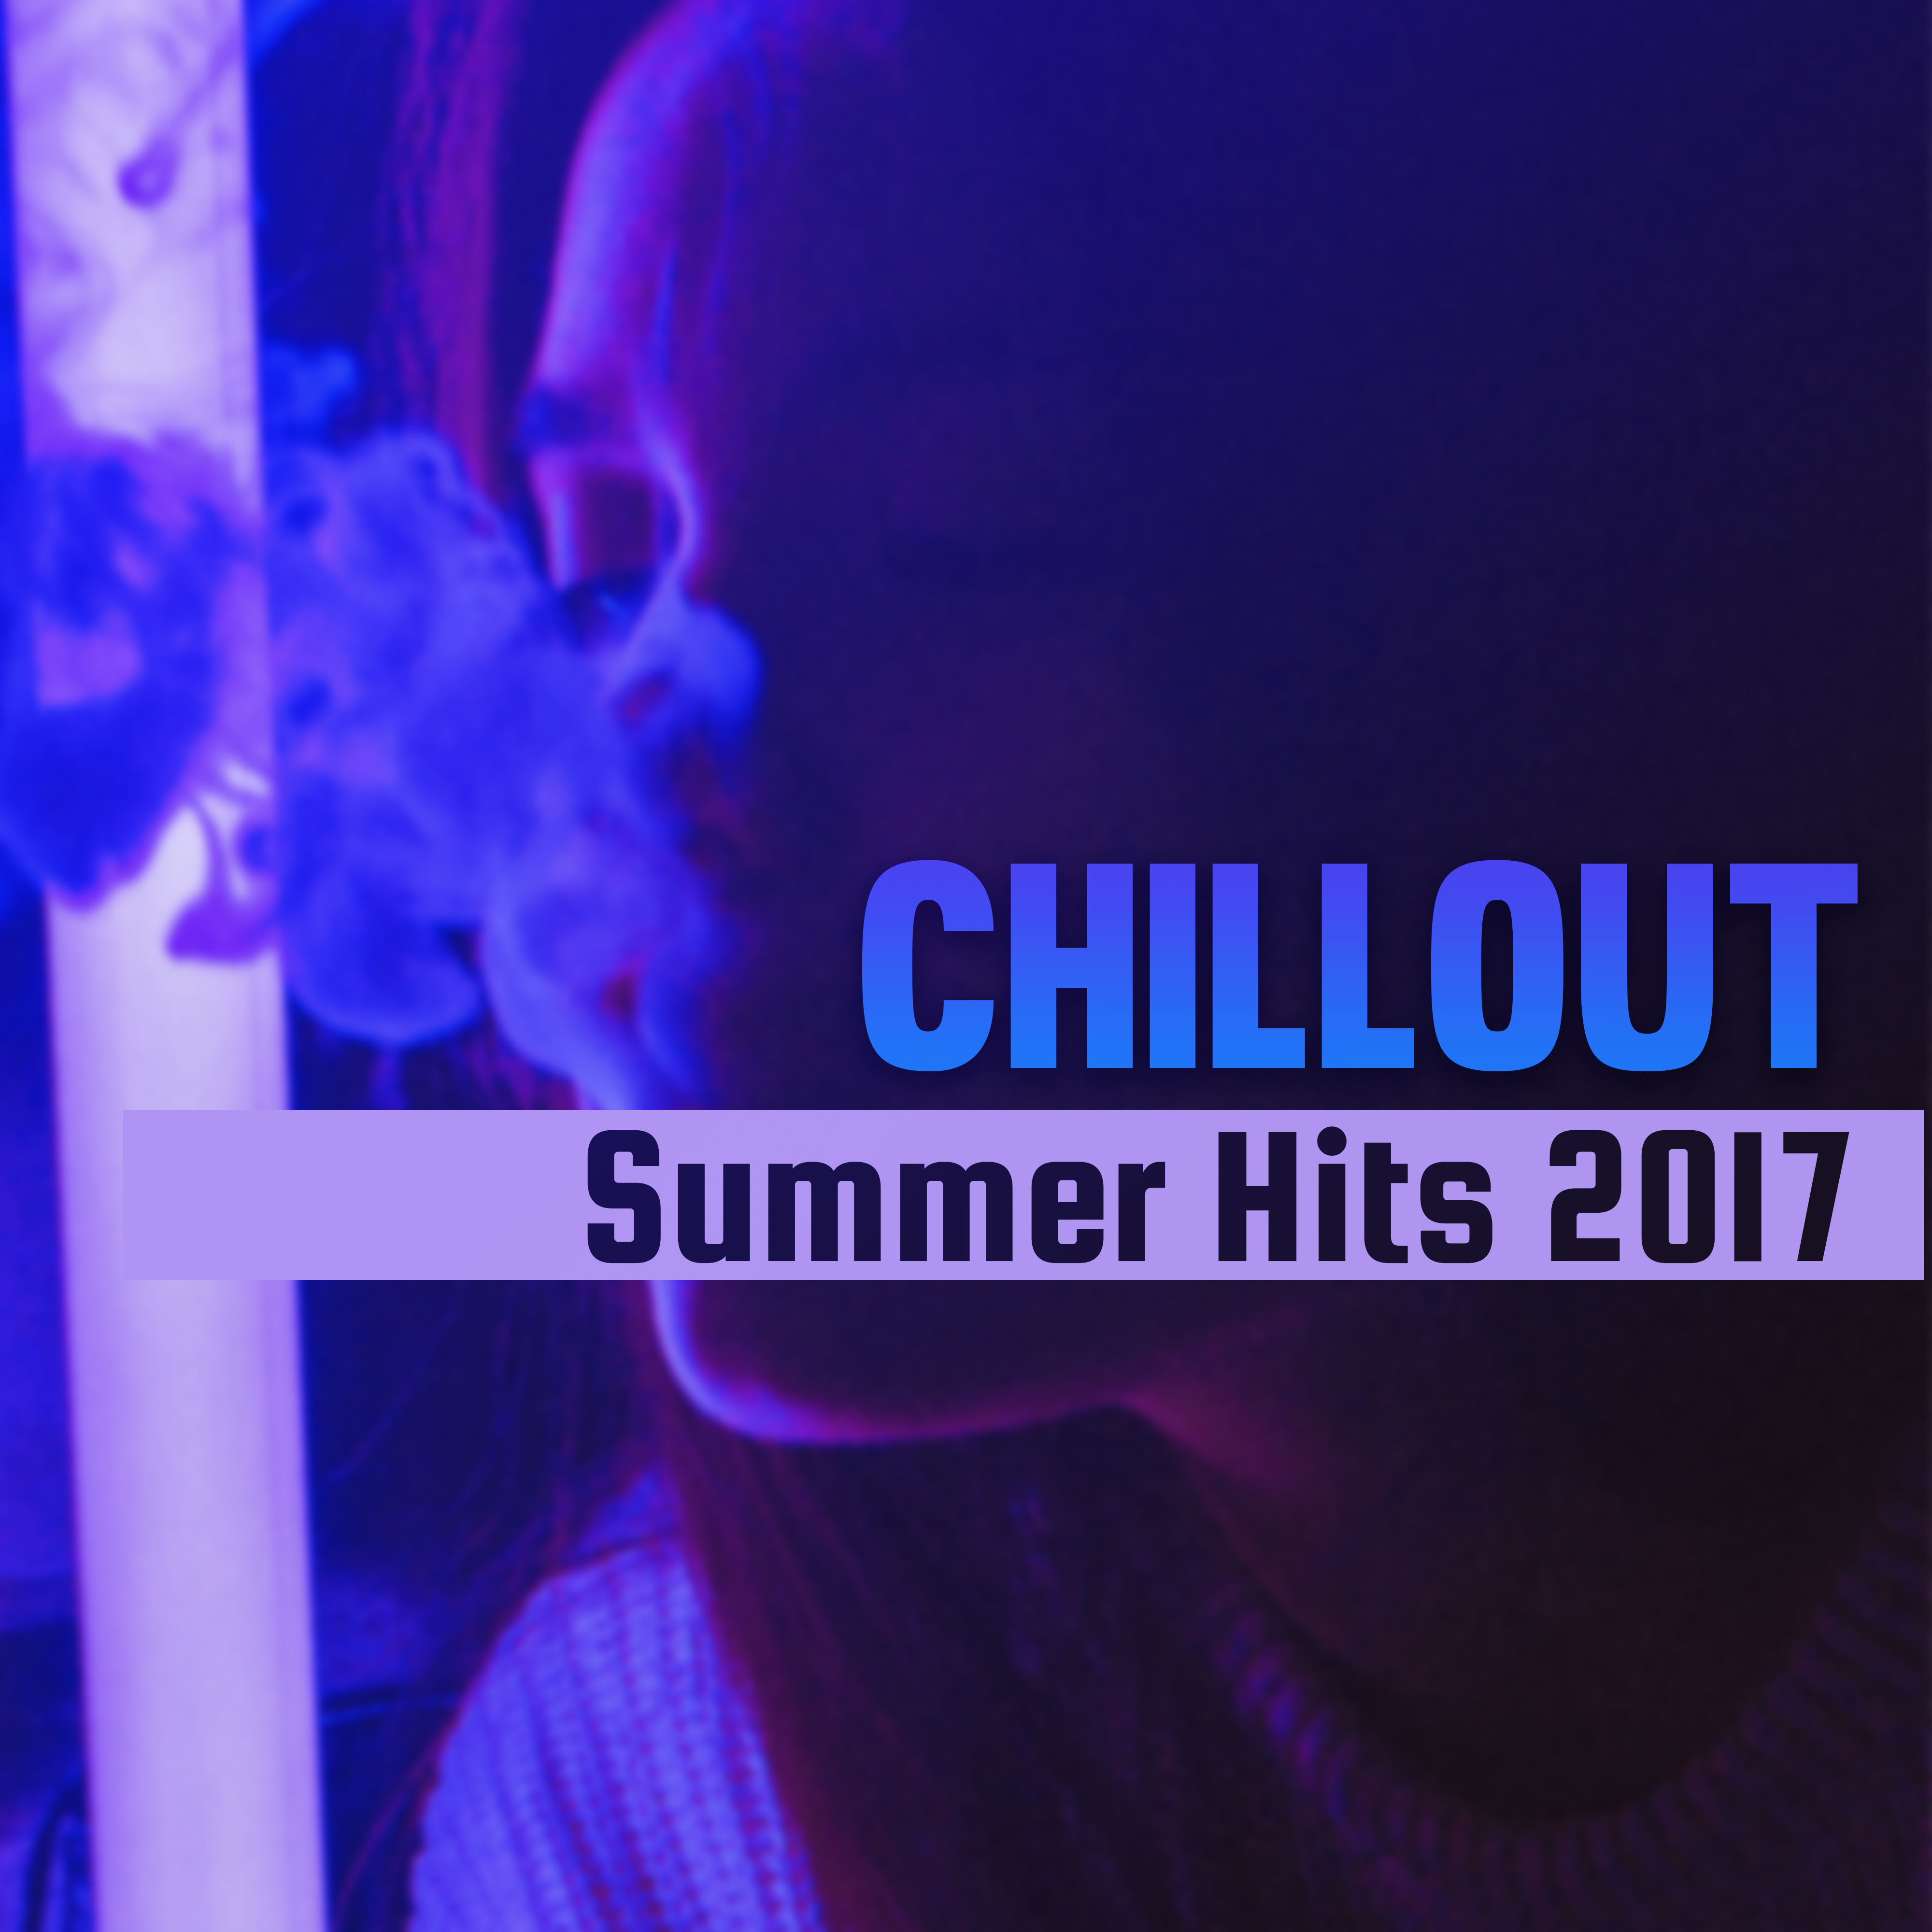 Chillout Summer Hits 2017 – Chillout Music, Summer End, Holiday Memories, Party Hits